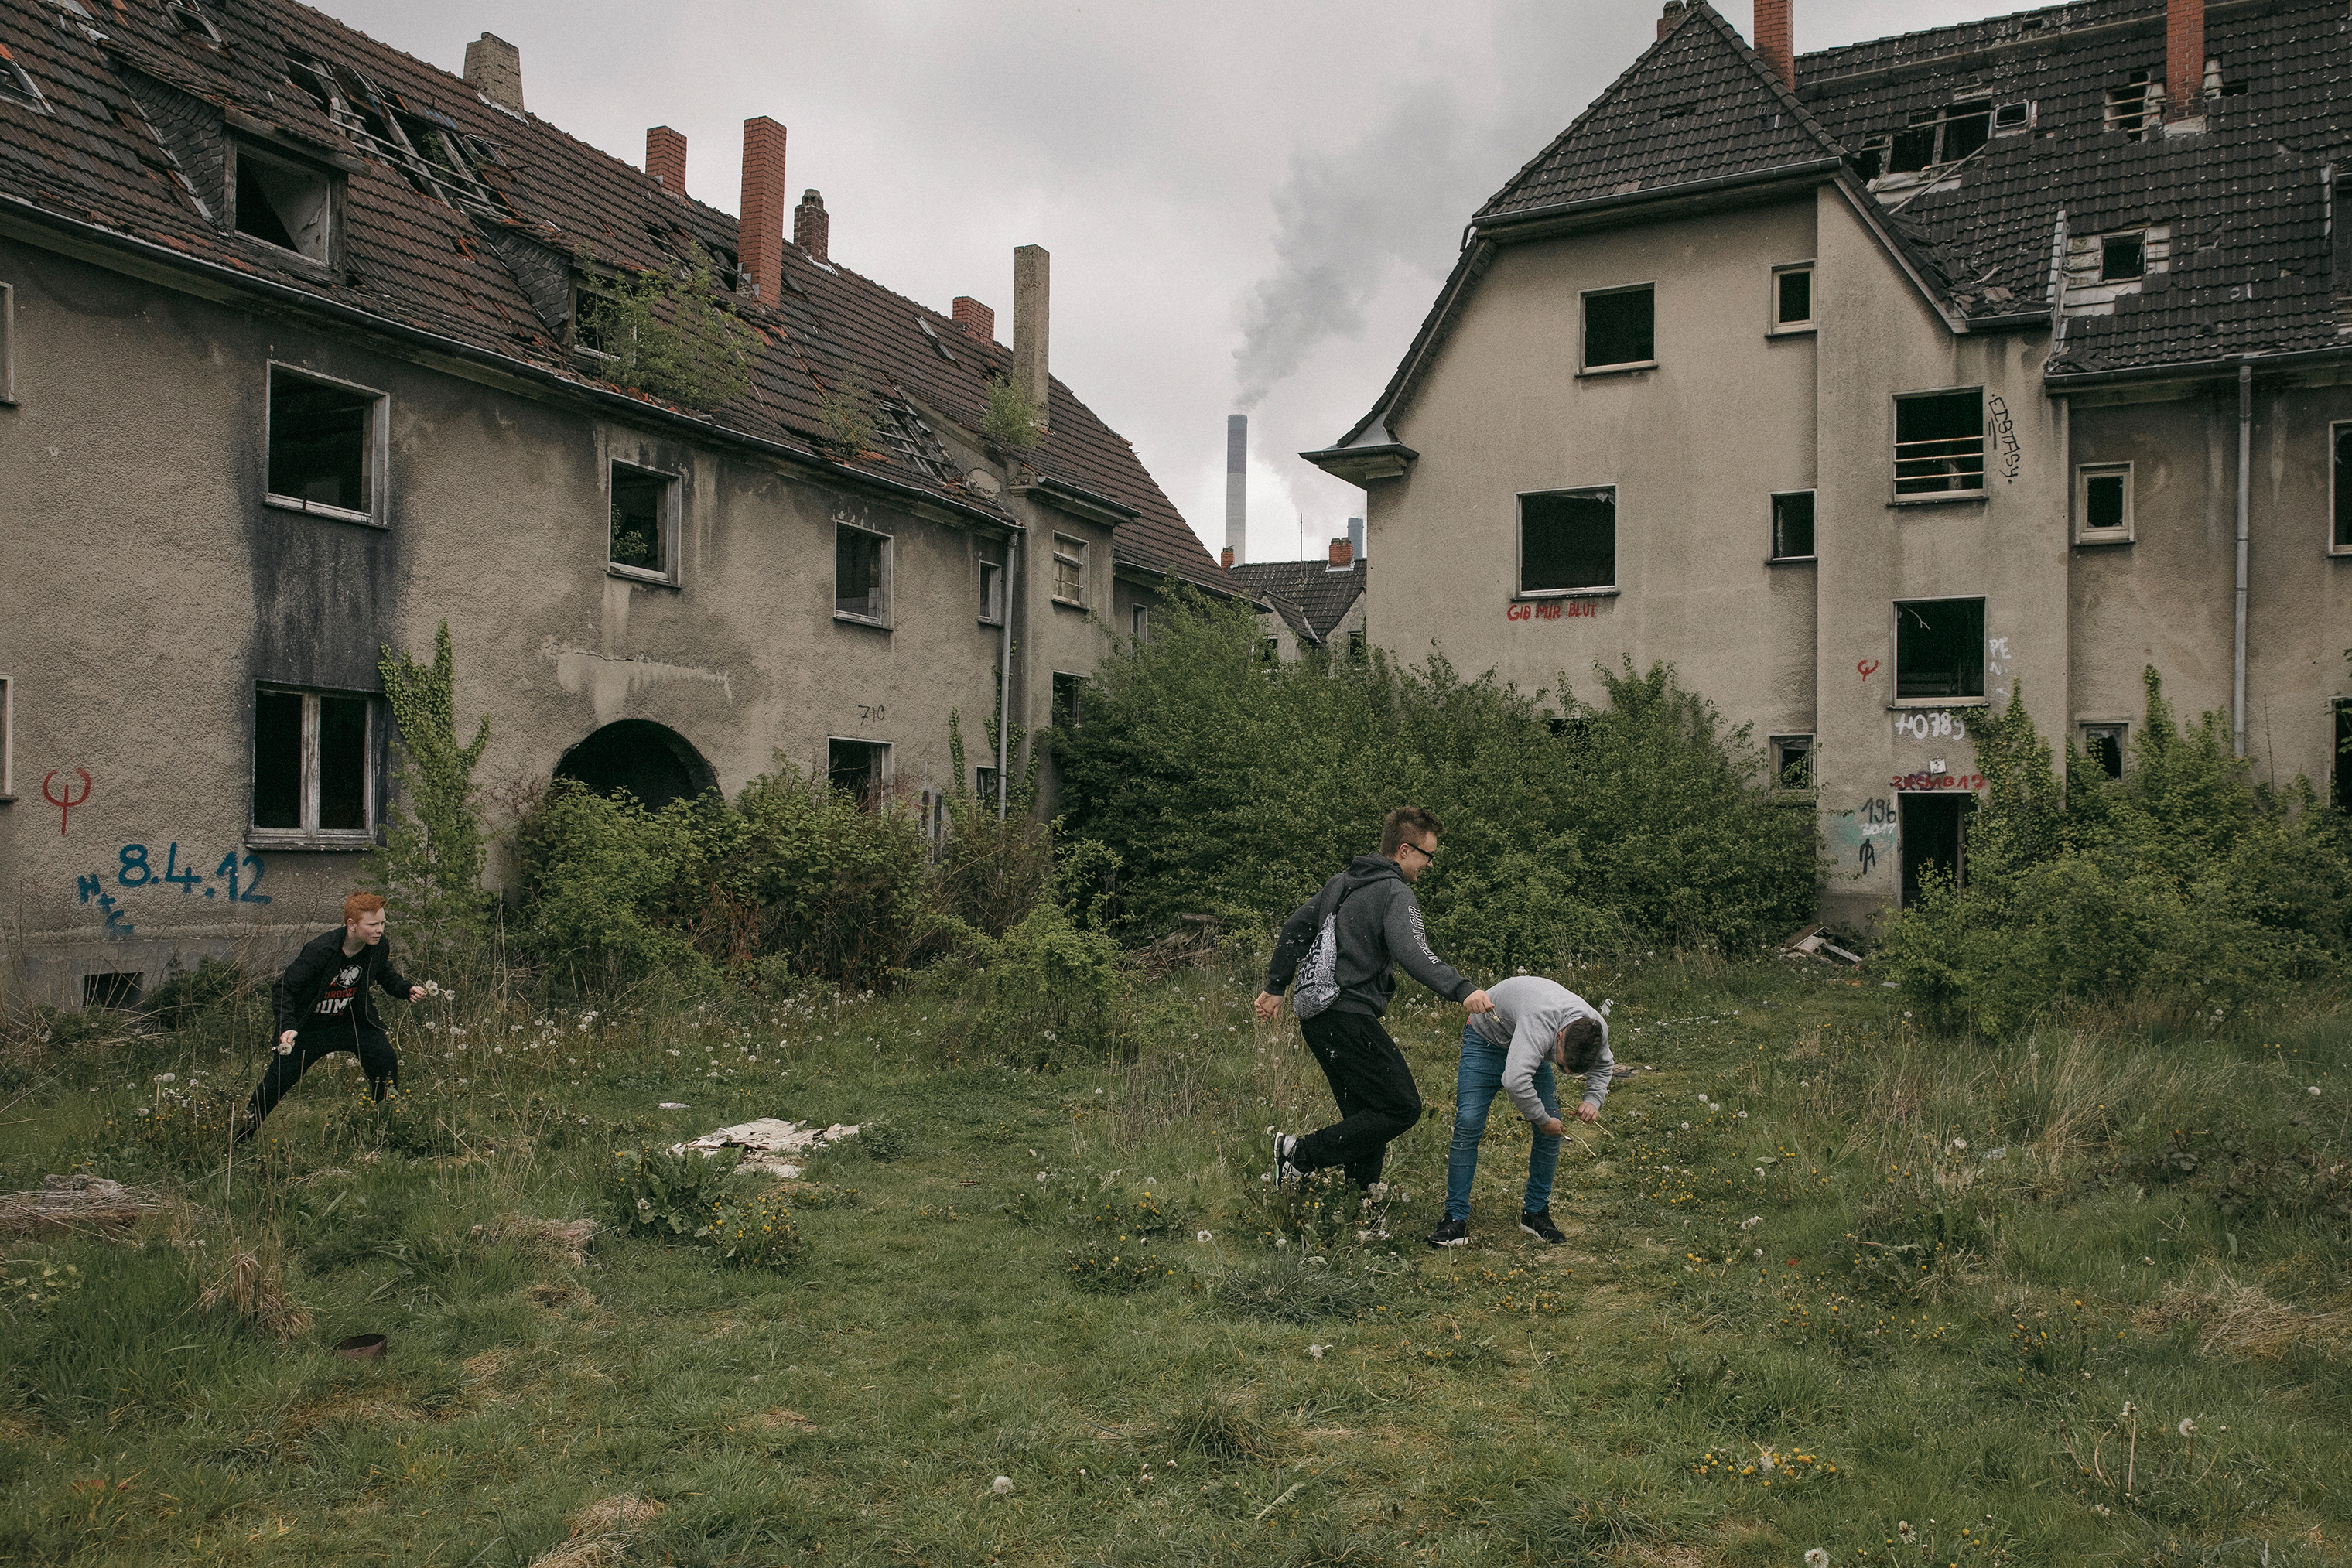 Children of Polish migrant workers play in an abandoned mining settlement in Gladbeck, not far from the mine. (Nanna Heitmann)